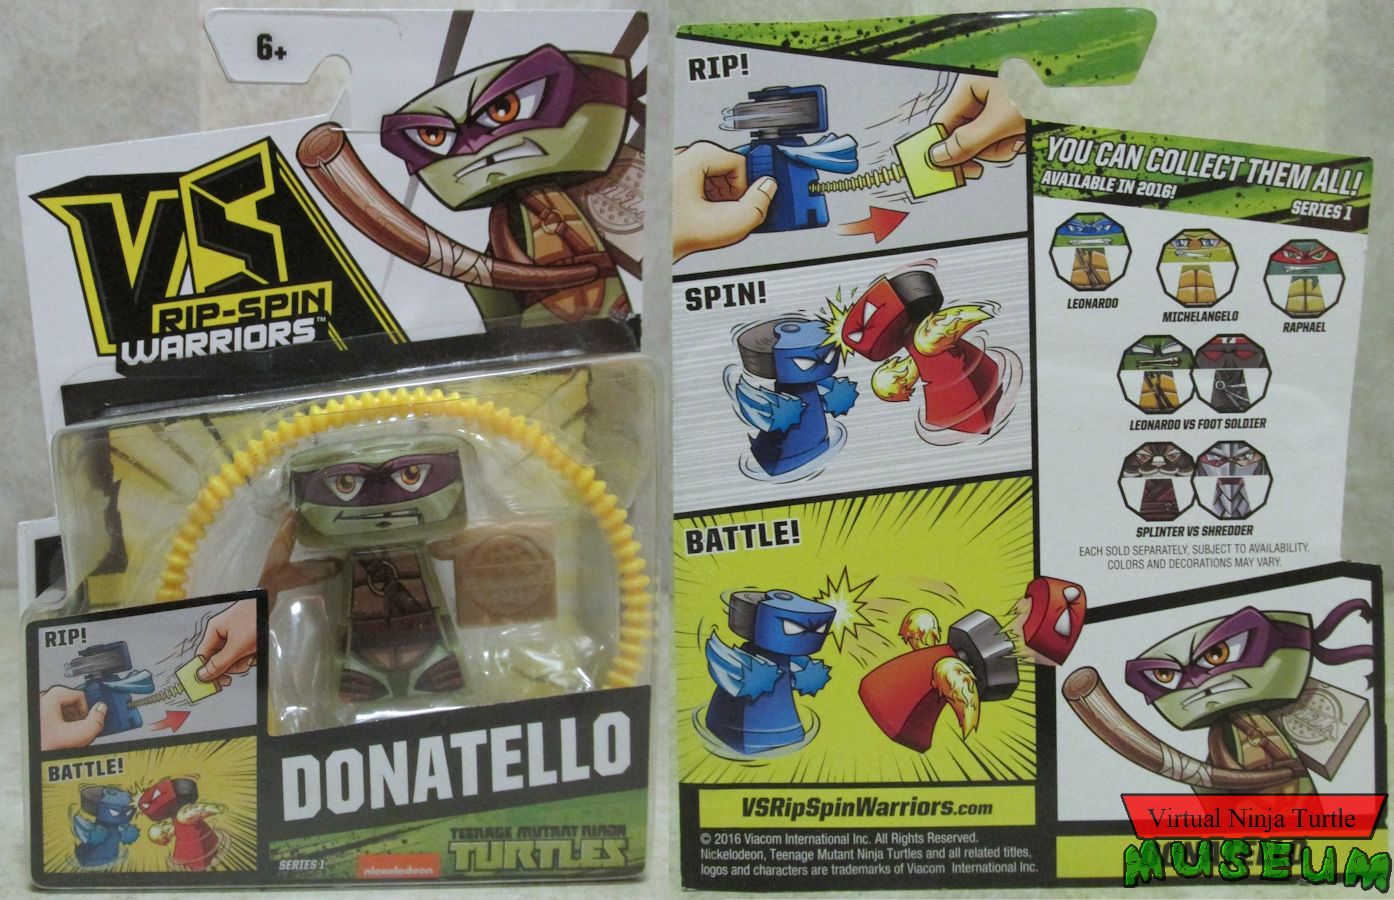 Rip-Spin Warriors Donatello card front and back